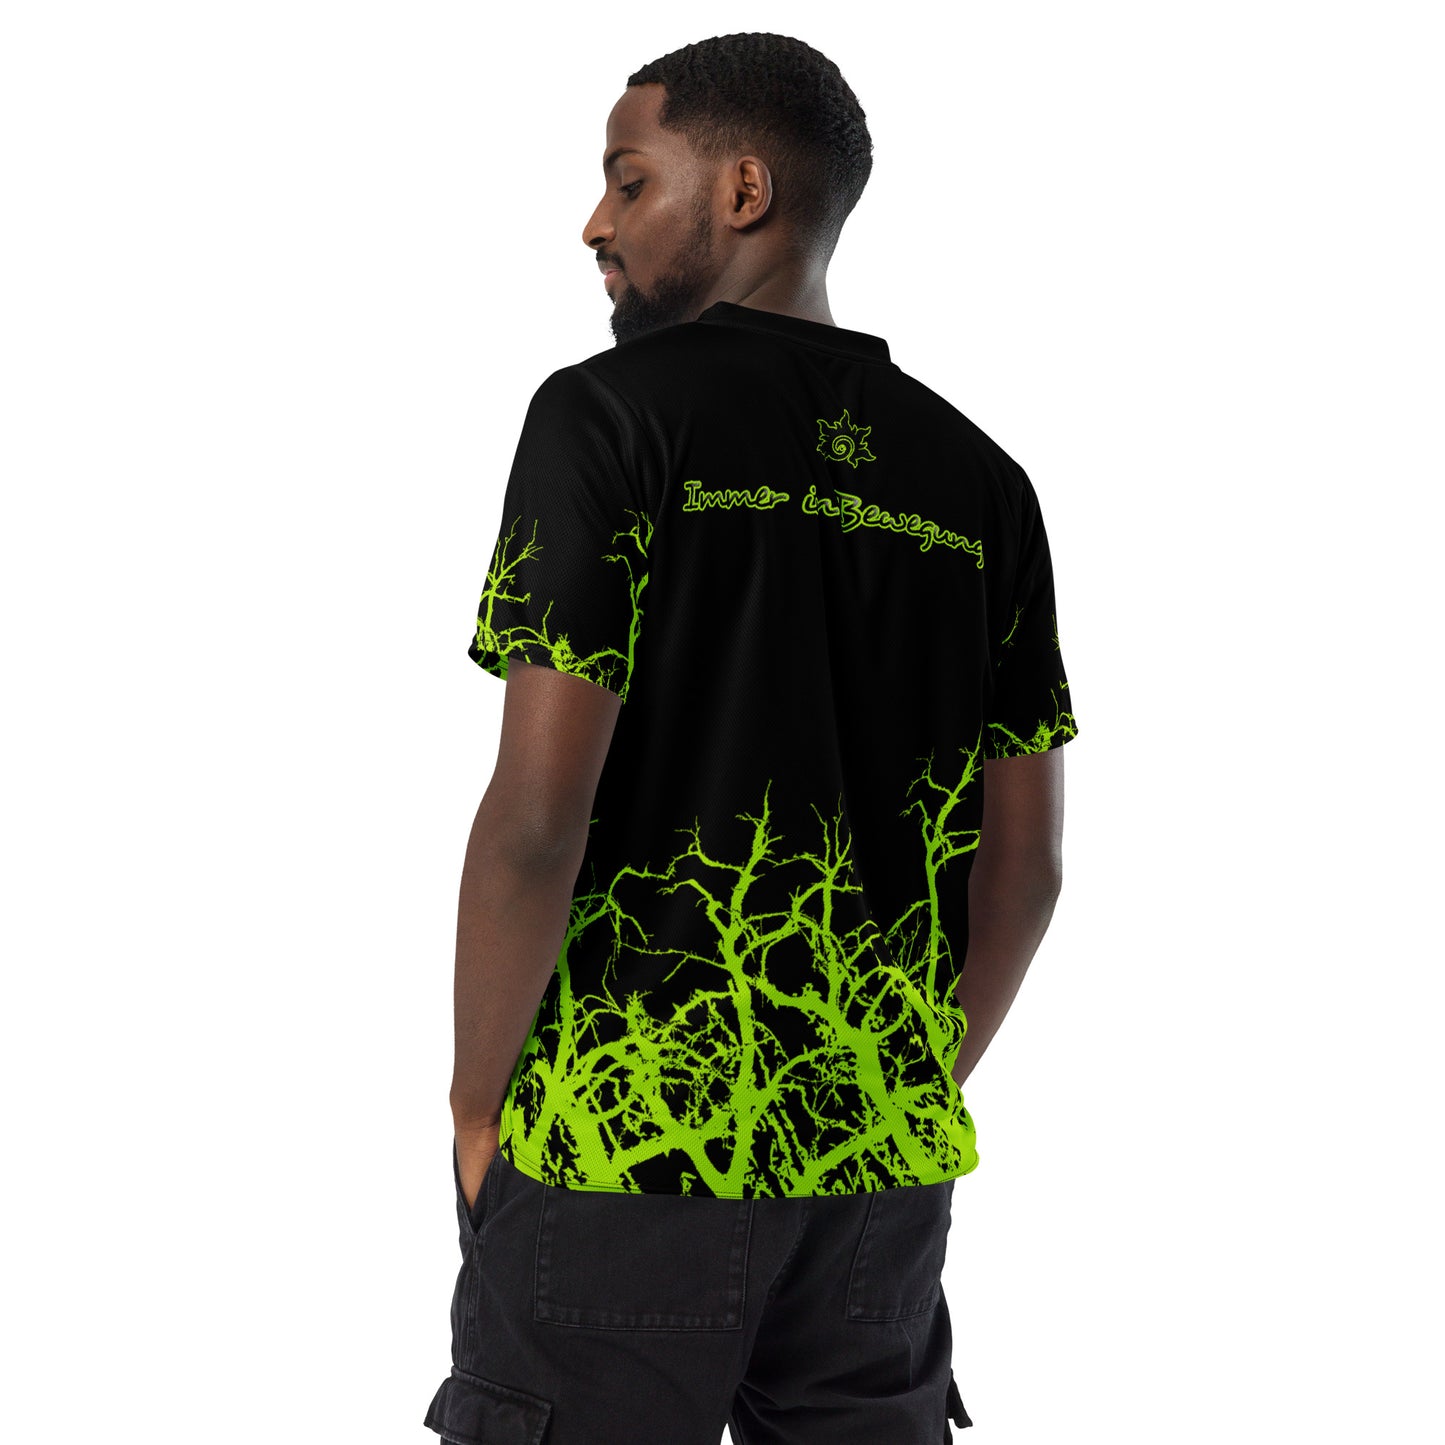 Recycled Unisex Sports Jersey 1 HIITanz